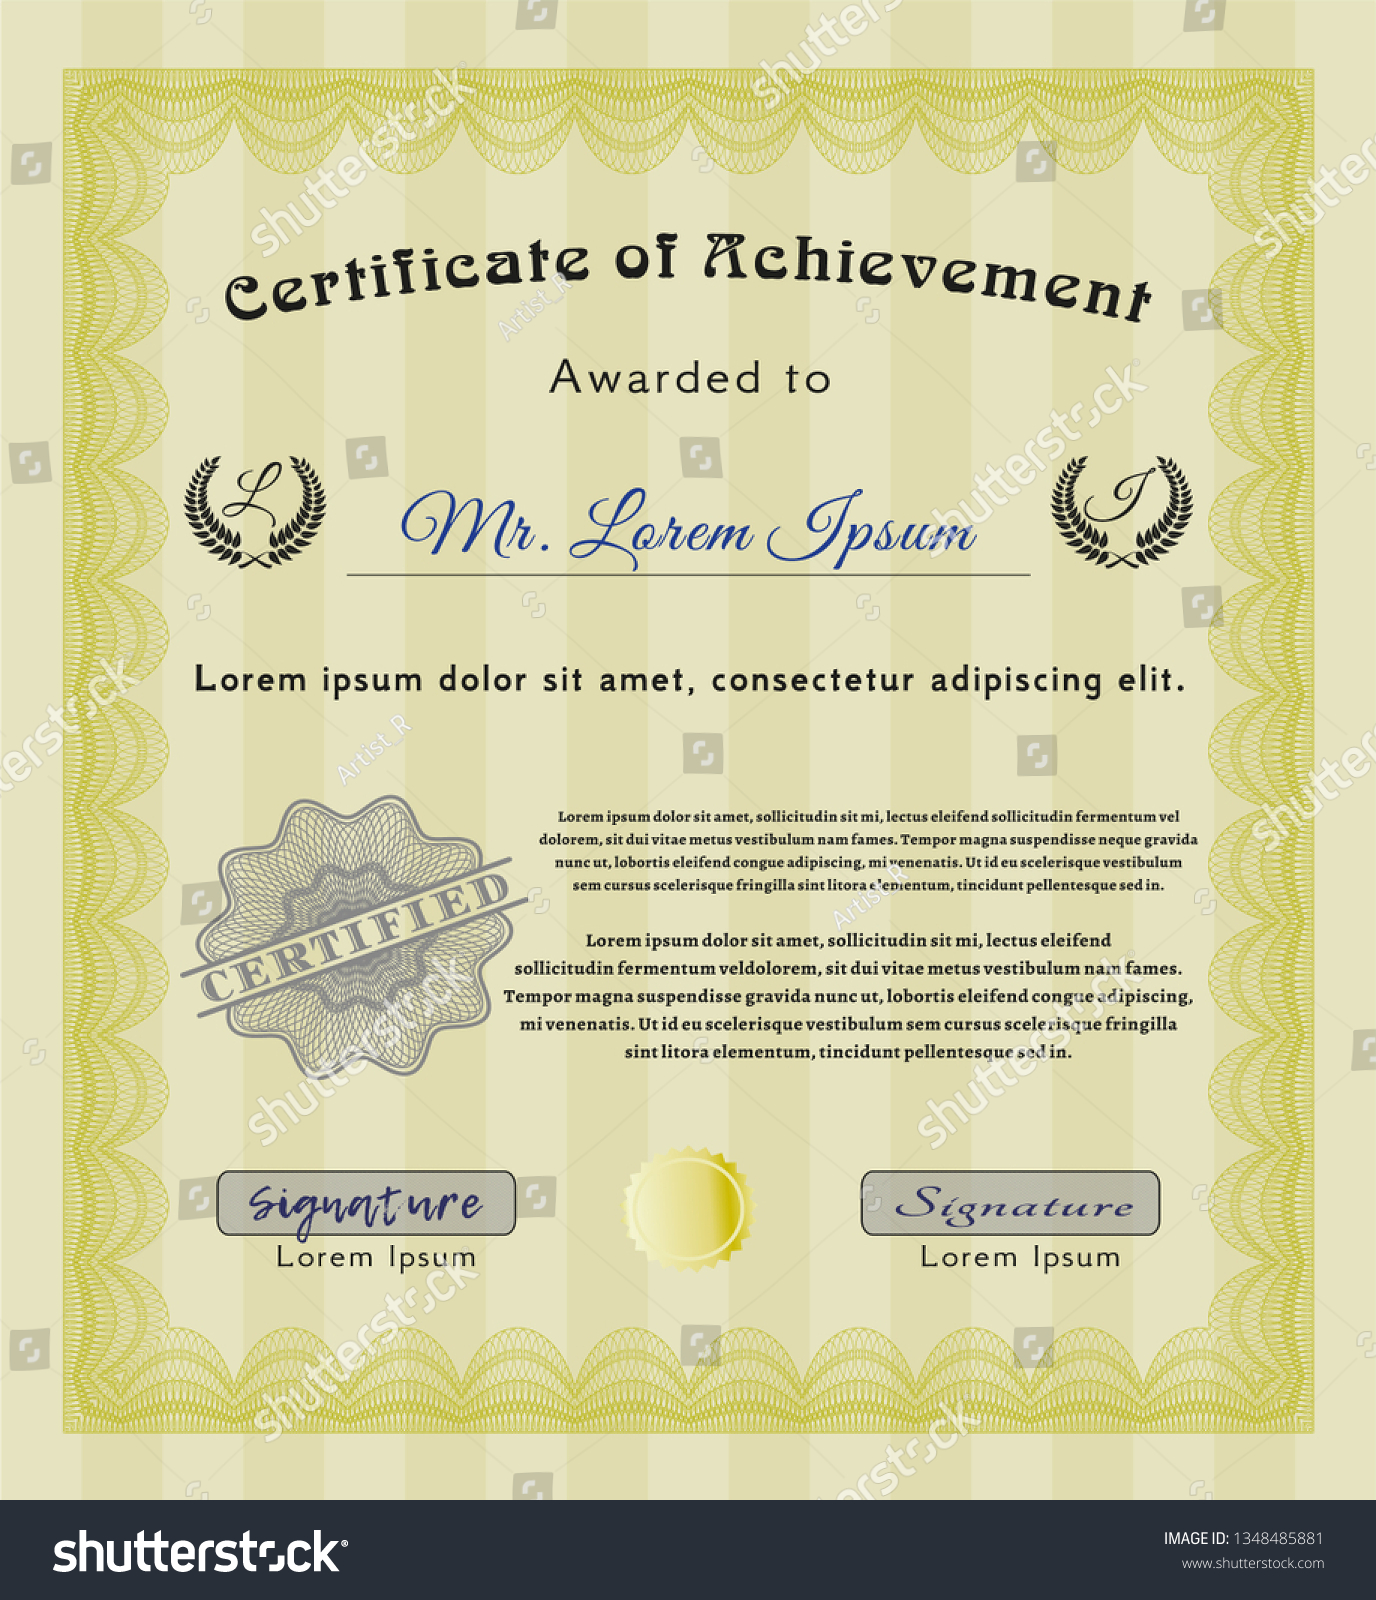 Yellow Diploma or certificate template. With quality background. Modern design. Detailed.  #1348485881